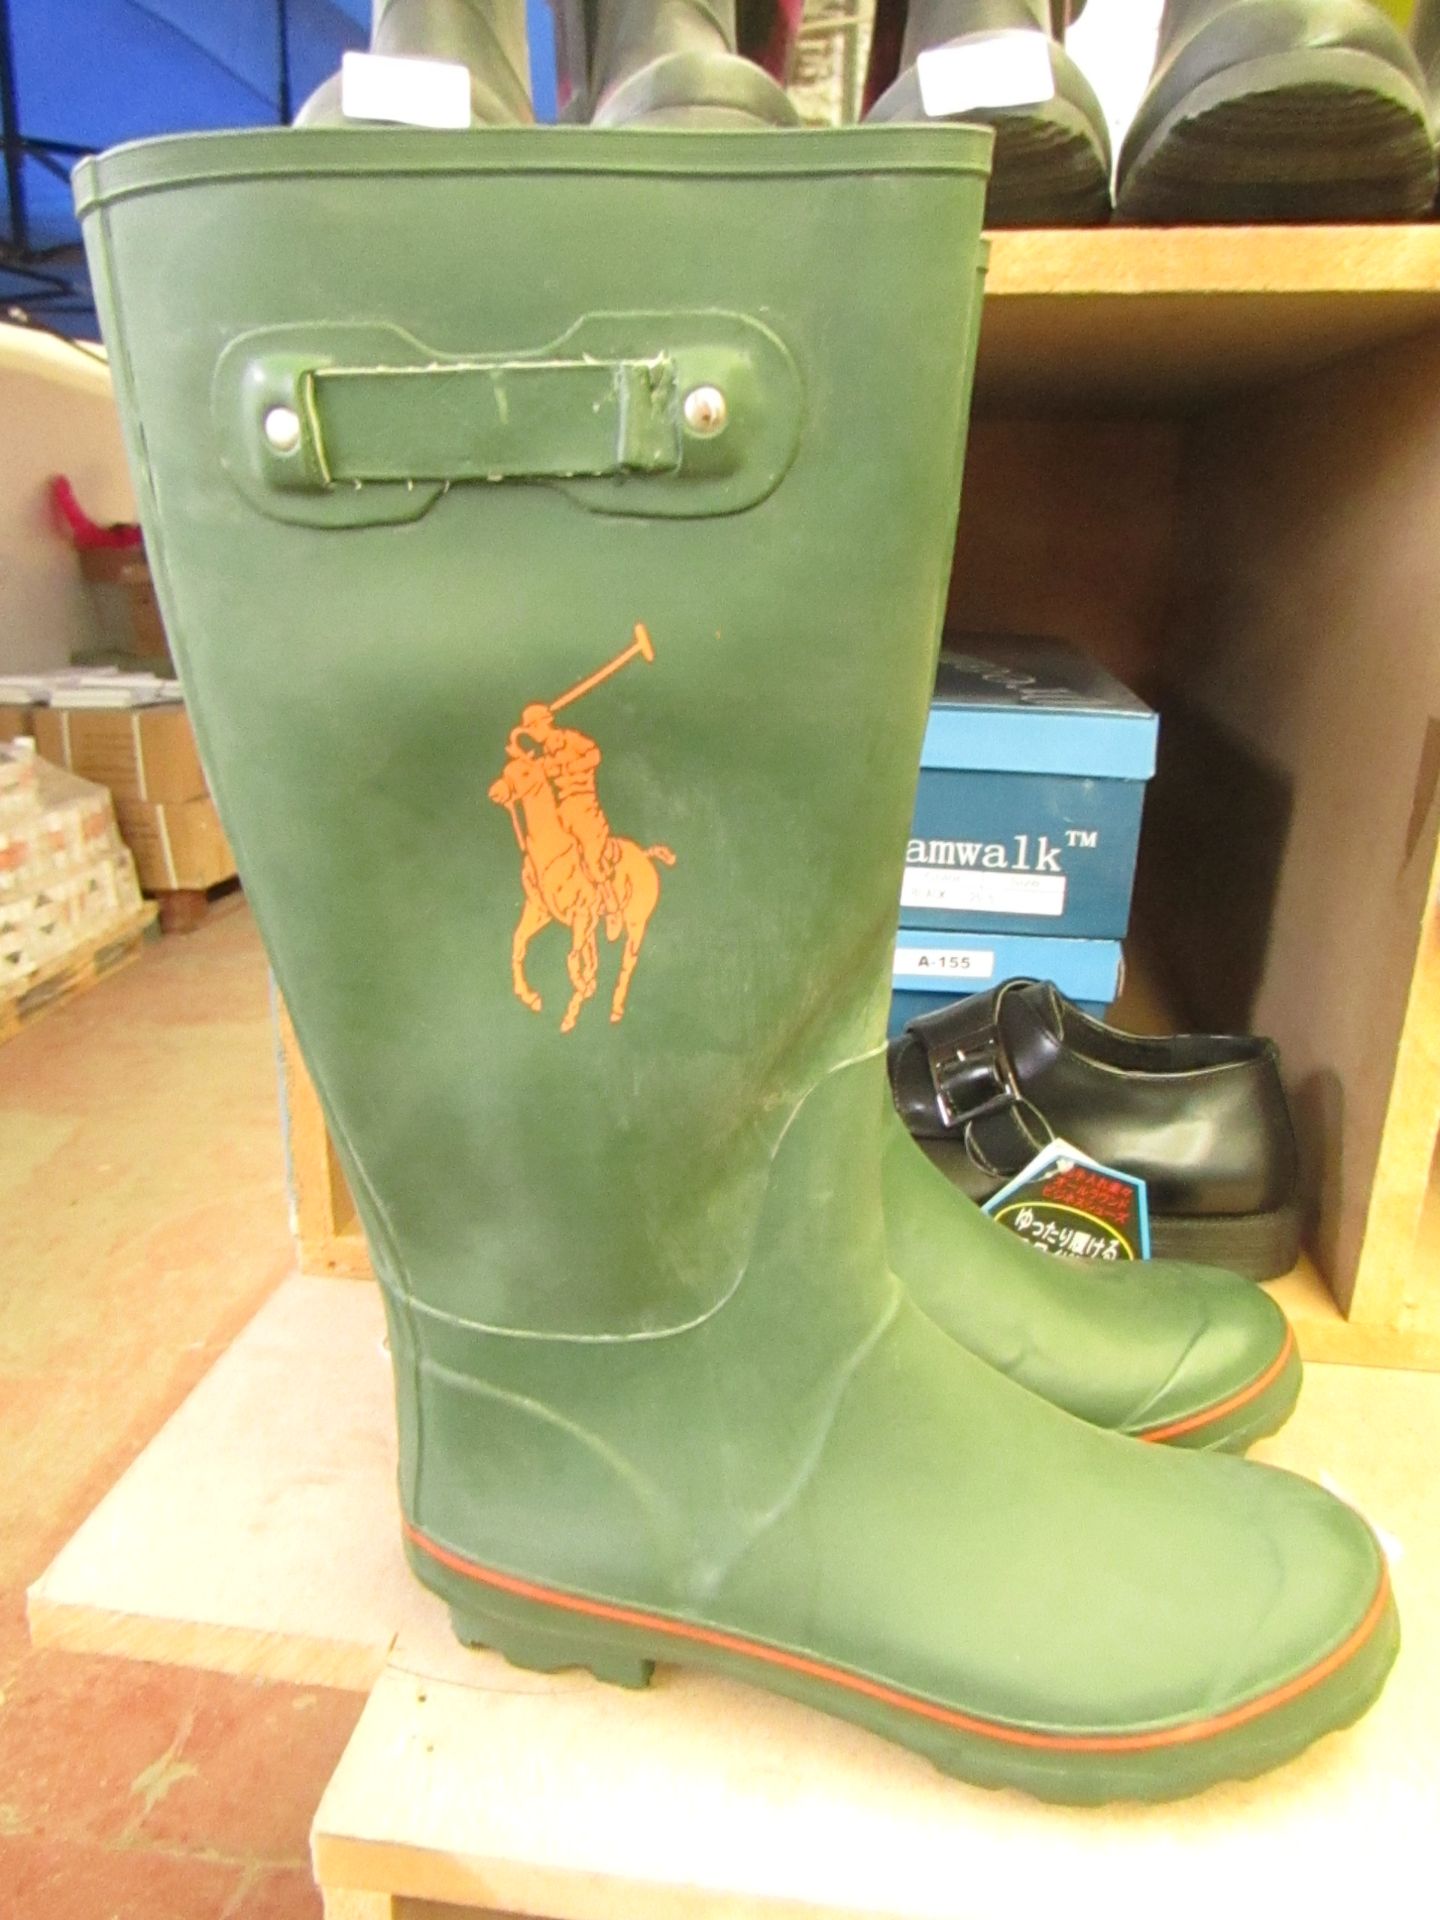 9 UK Size Men's - Polo - Ralph Lauren - Matteo Green Wellies (vendor informs us these are seconds